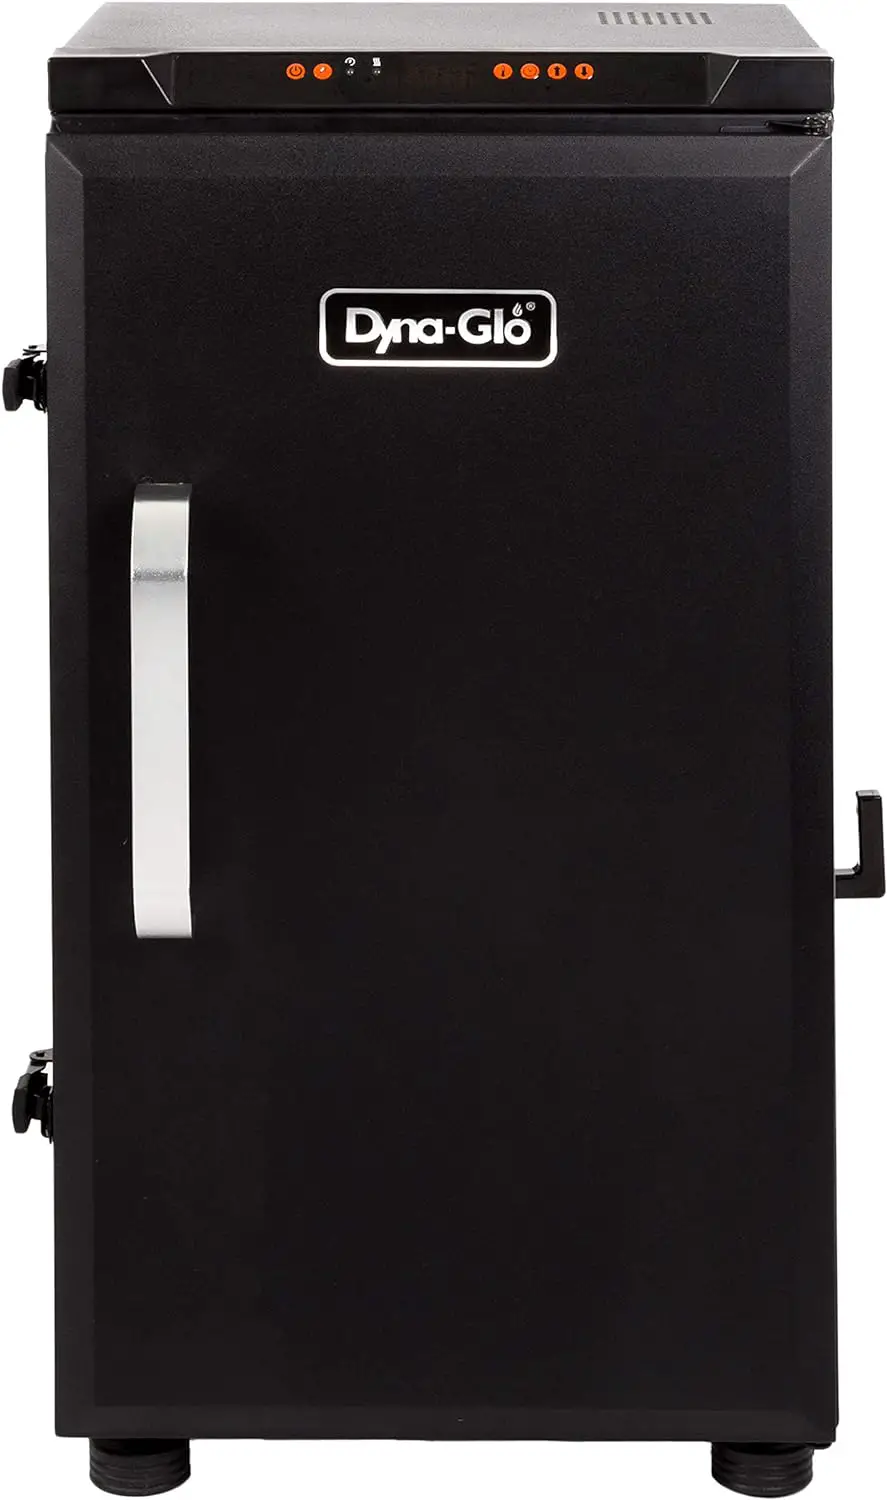 You are currently viewing Dyna-Glo DGU732BDE-D 30-inch Digital Electric Smoker